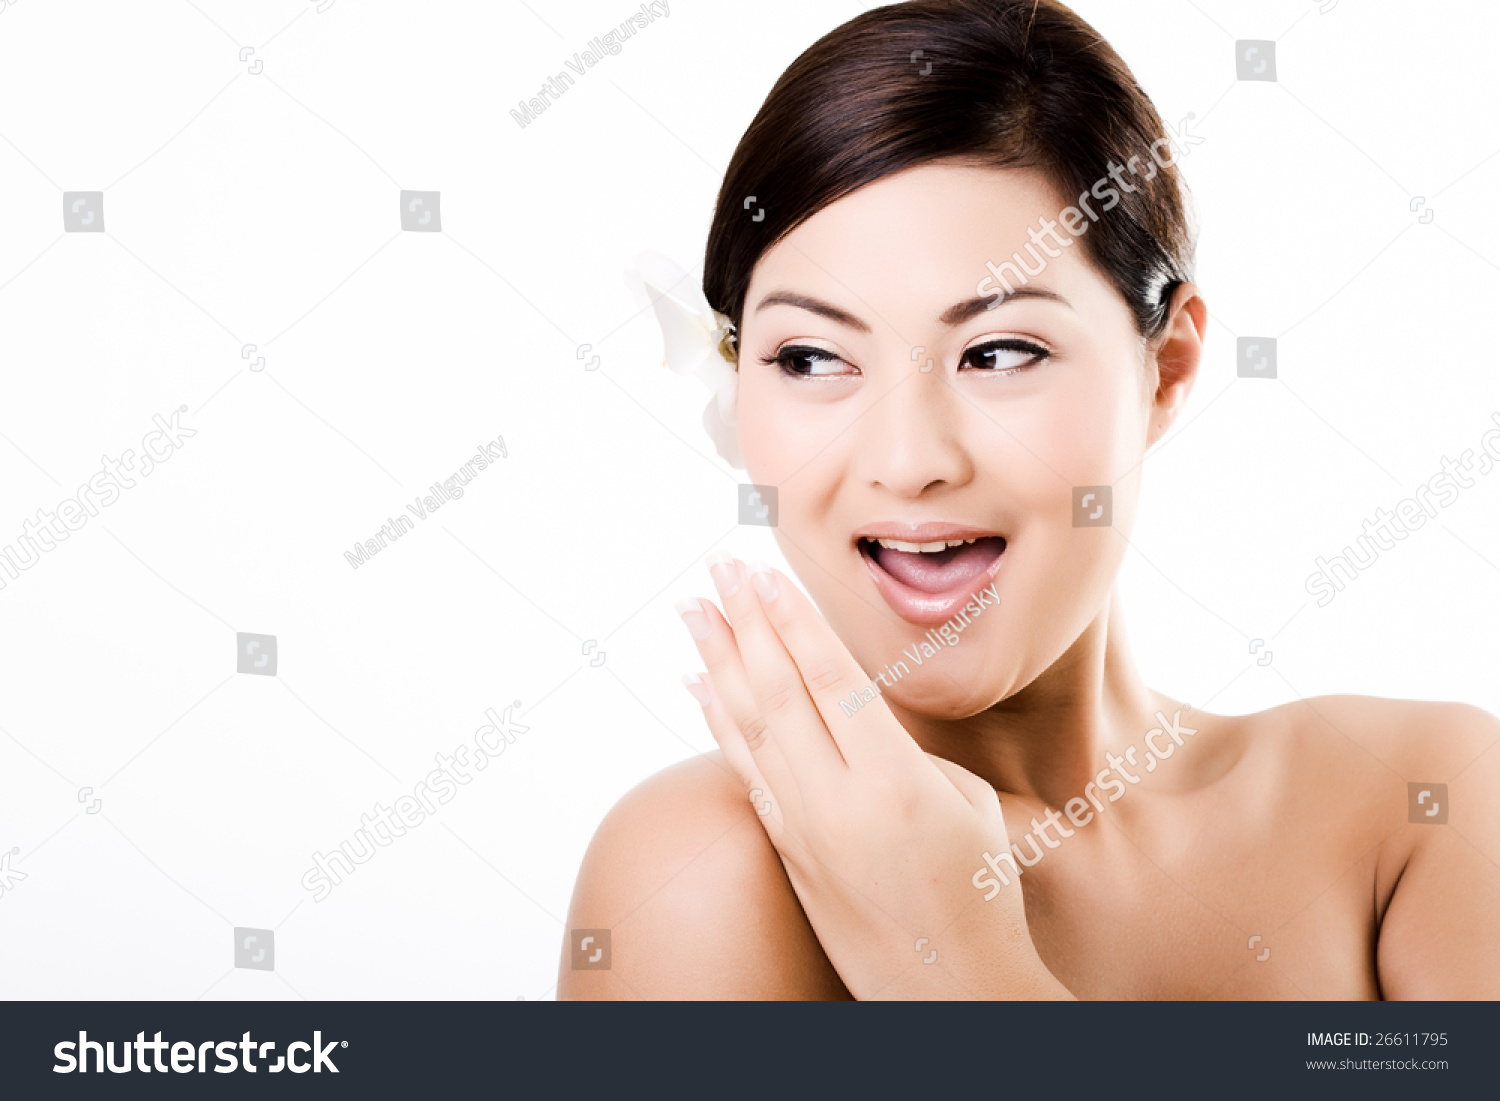 Portrait of an attractive asian female showing surprised face #26611795